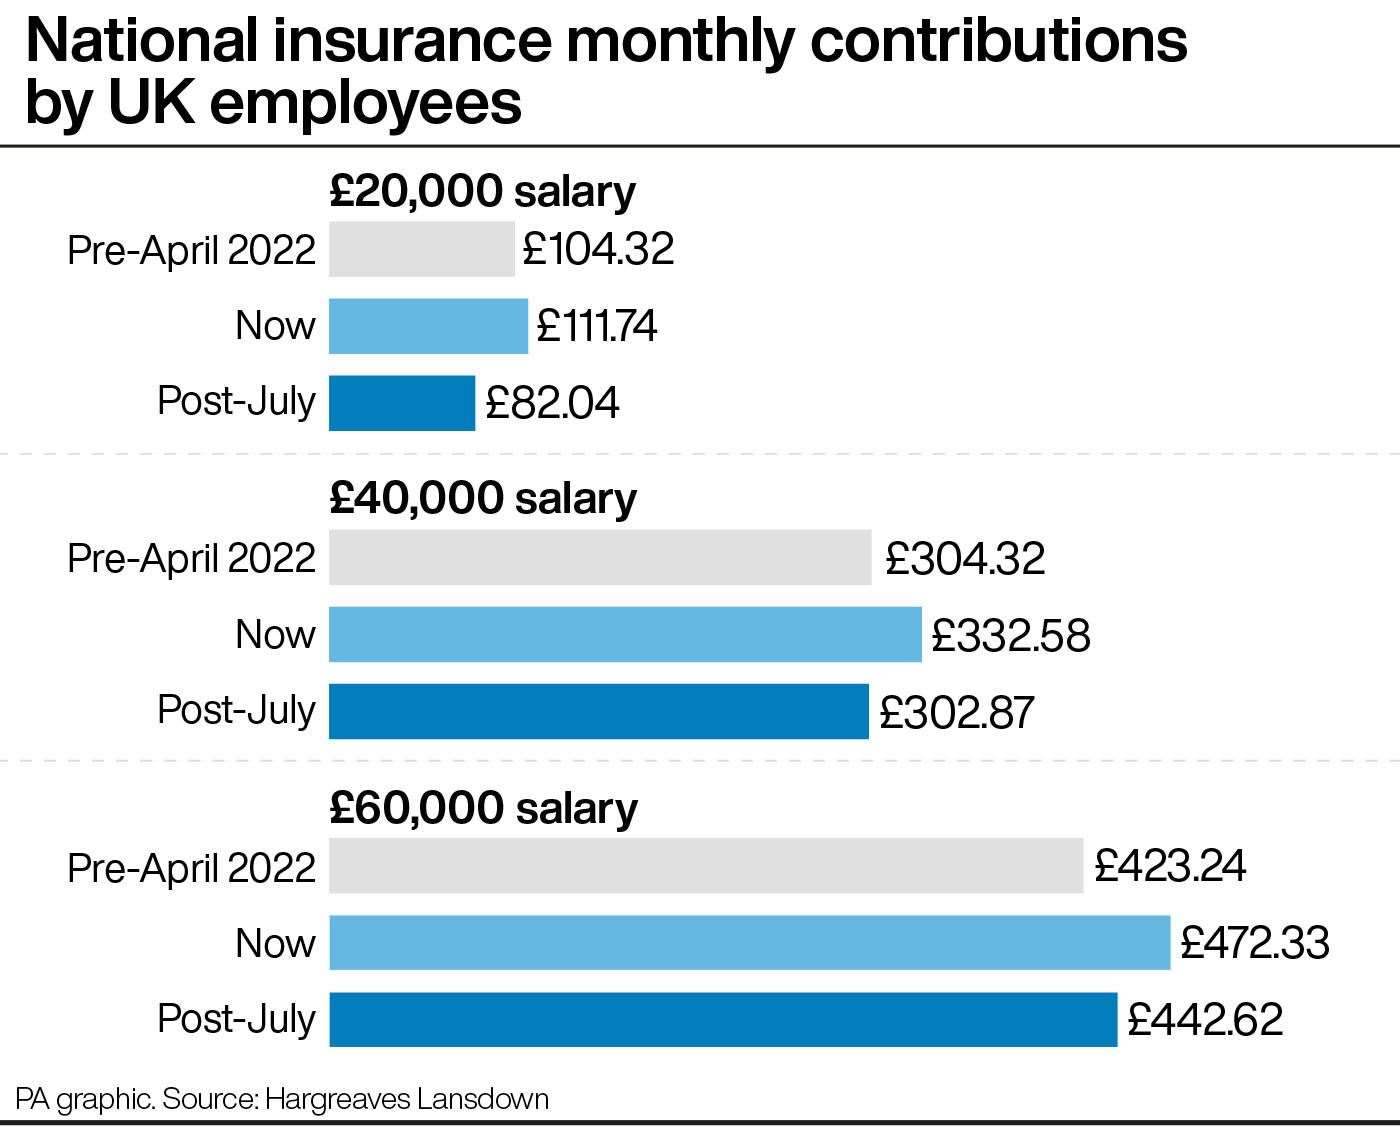 What impact will the rising national insurance threshold have on your